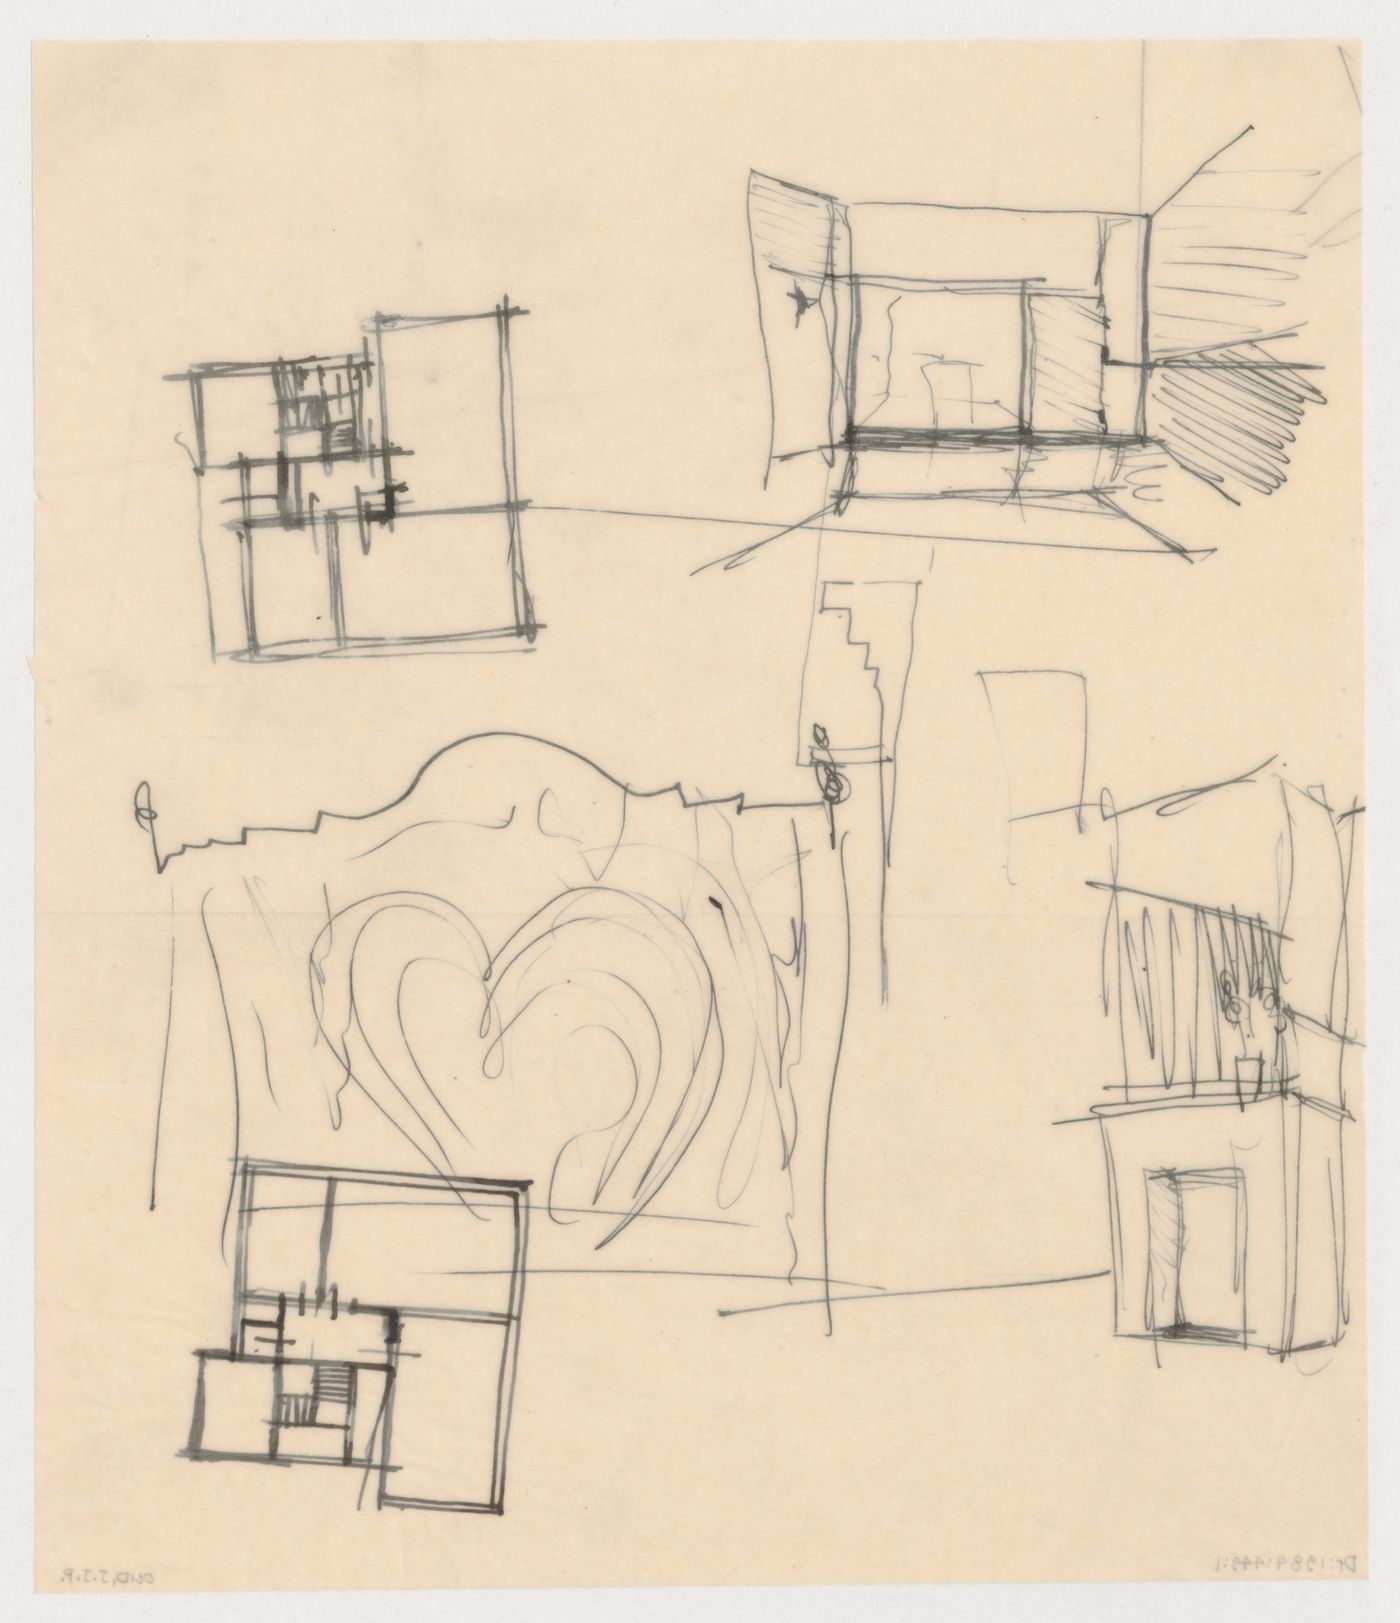 Sketch plan, possibly for a house, Netherlands; verso: Sketch plan and sketch perspective, possibly for a house interior and sketch perspective, possibly for a fireplace, Netherlands